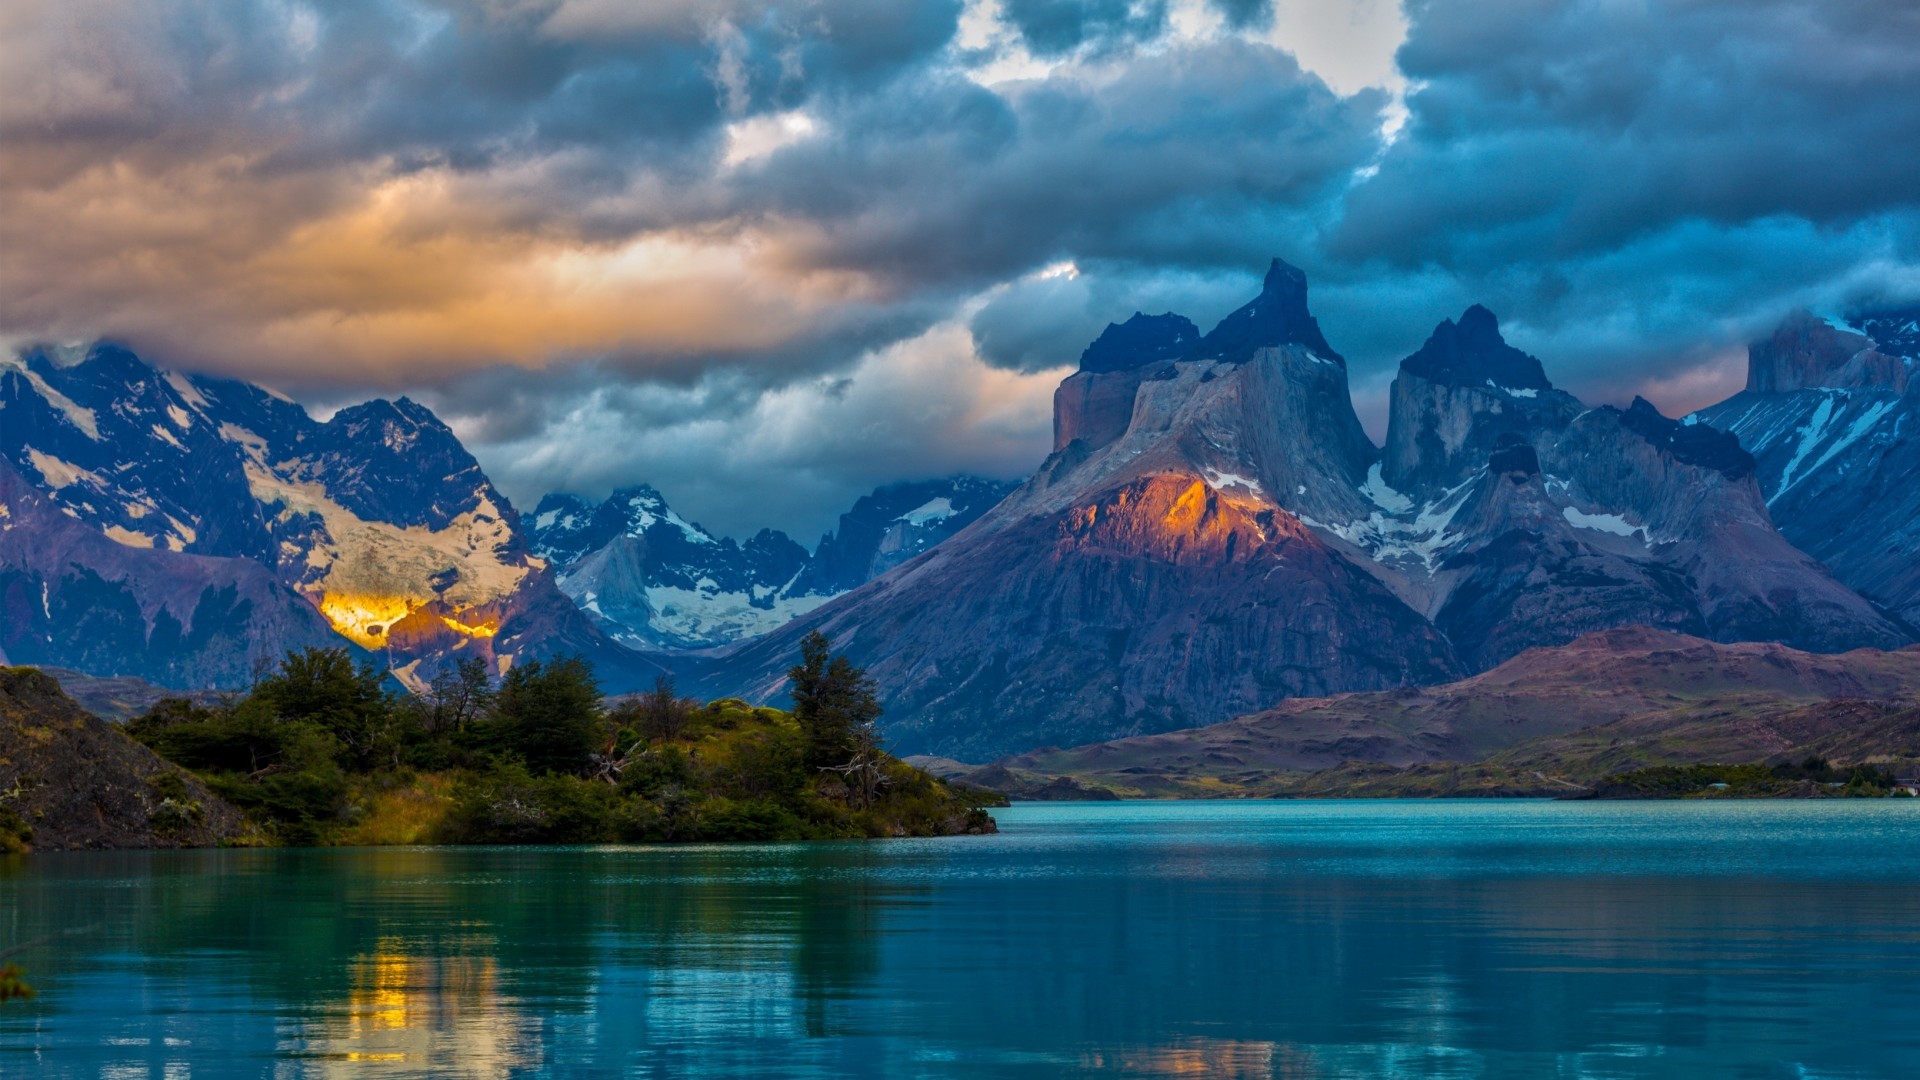 1920x1080 Preview wallpaper landscape, argentina, mountain, lake, patagonia, clouds,  nature 